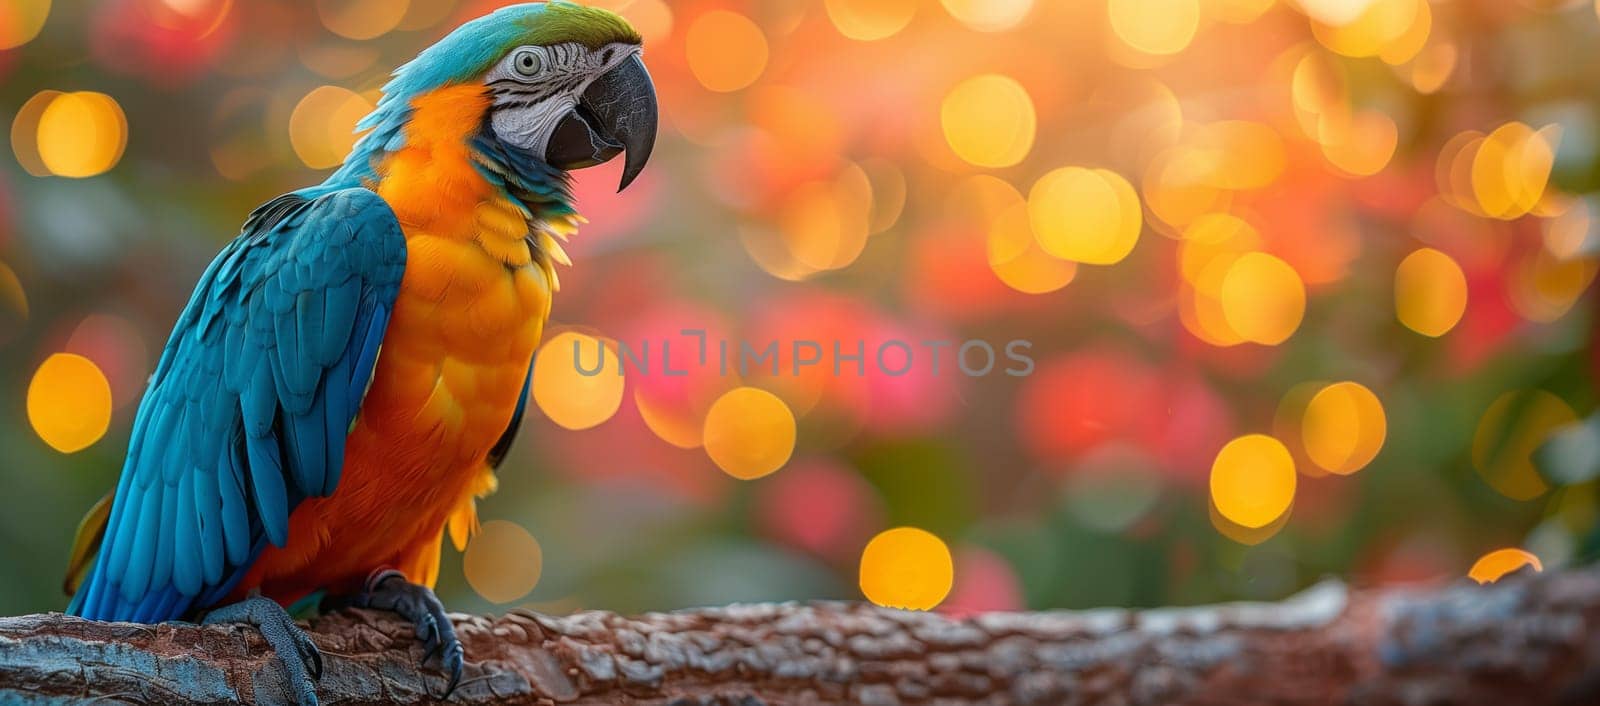 A vibrant Macaw perched happily on a tree branch in nature by richwolf